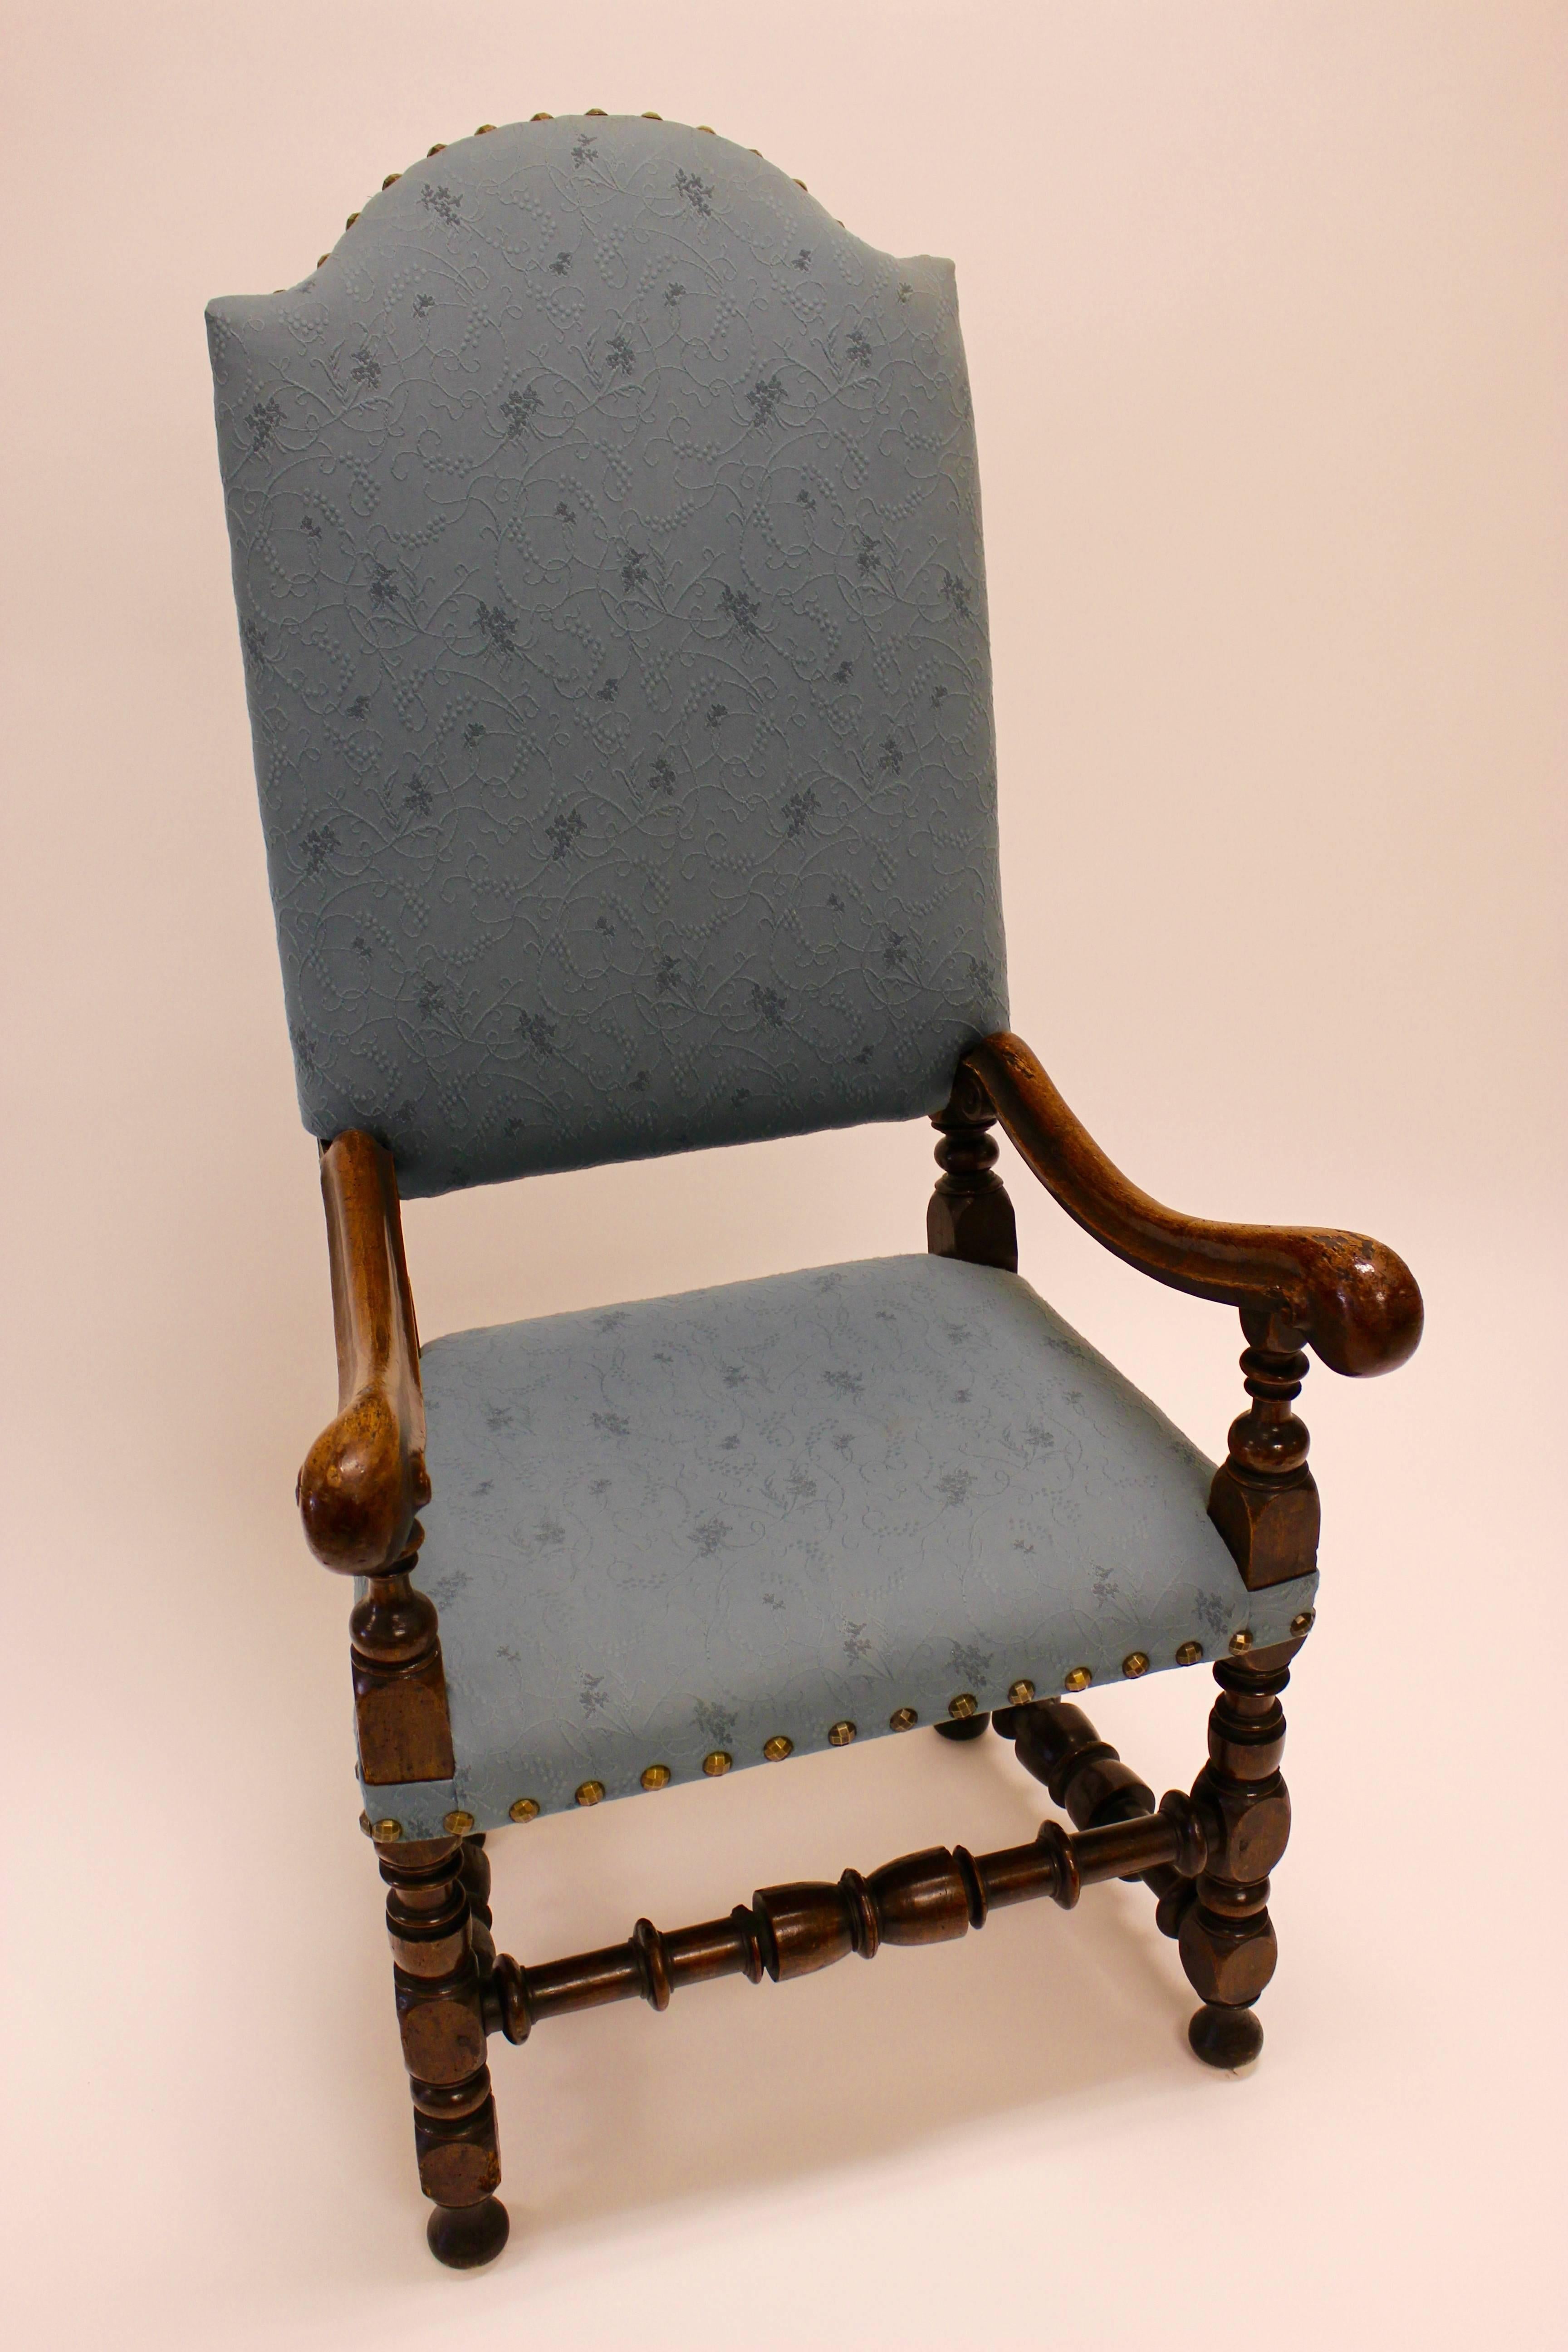 Italian Baroque walnut armchair, the arched upholstered back with tack trim and finials above volute scrolled arms on baluster supports and upholstered seat raised on baluster and block turned legs, joined by turned stretchers. Late 17th/early 18th